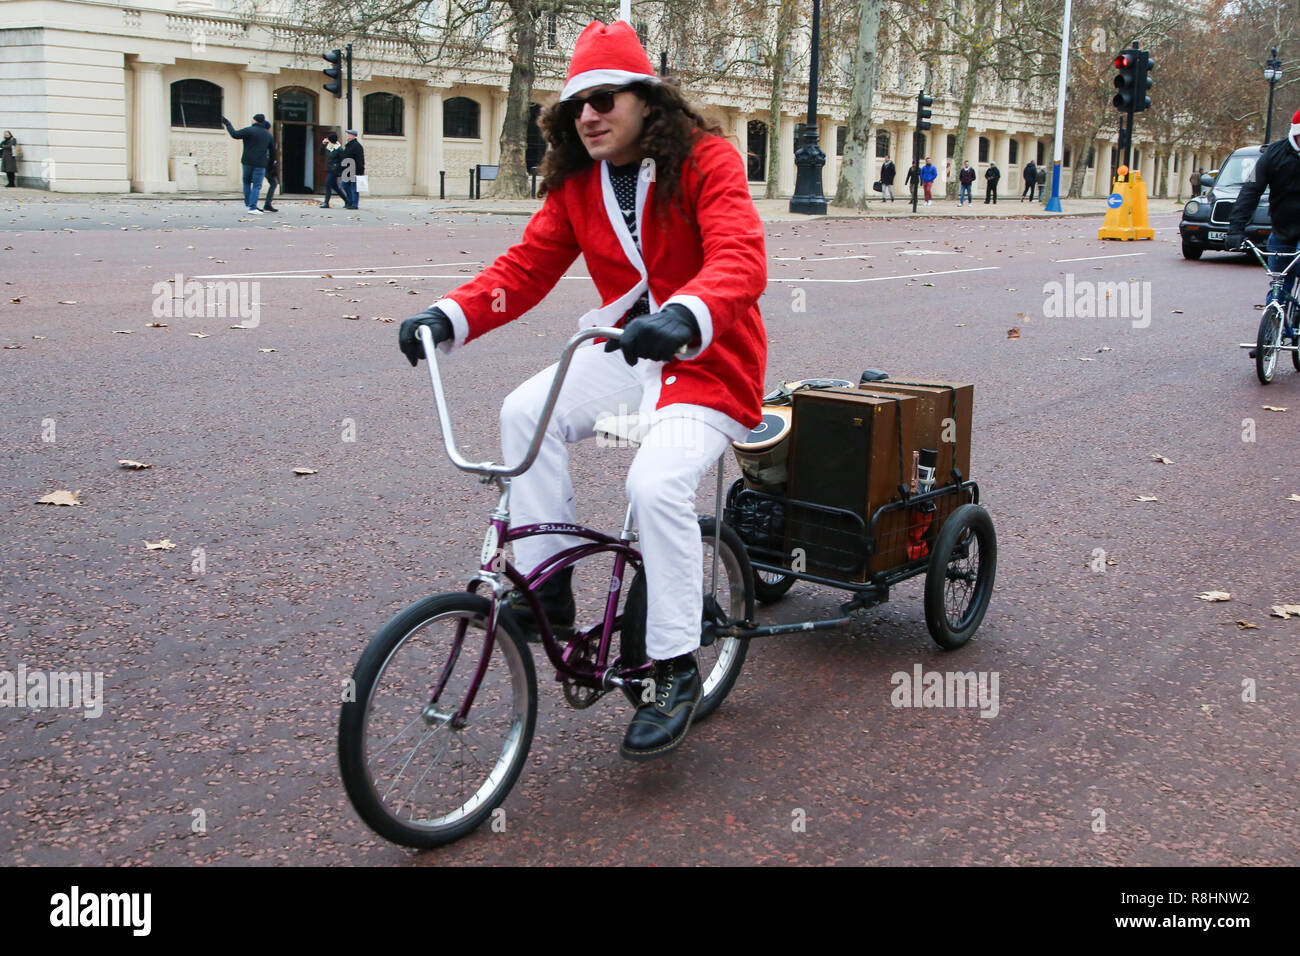 London, UK. 15th Dec, 2018. A man dressed as Father Christmas is seen on The Mall as he cycles during the event.Cycling through London to raise awareness and money for Evelina London Children's Hospital (ECHO), for children with heart conditions. The annual event began four years ago after Stephane Wright's son Tommy, suffered a heart attack and spent time at Evelina London. Tommy was only 6 months old when he suffered a heart attack and nearly died. Fortunately Tommy recovered well but will require further operations as he grows up, so will be returning to the Evelina Lond Stock Photo